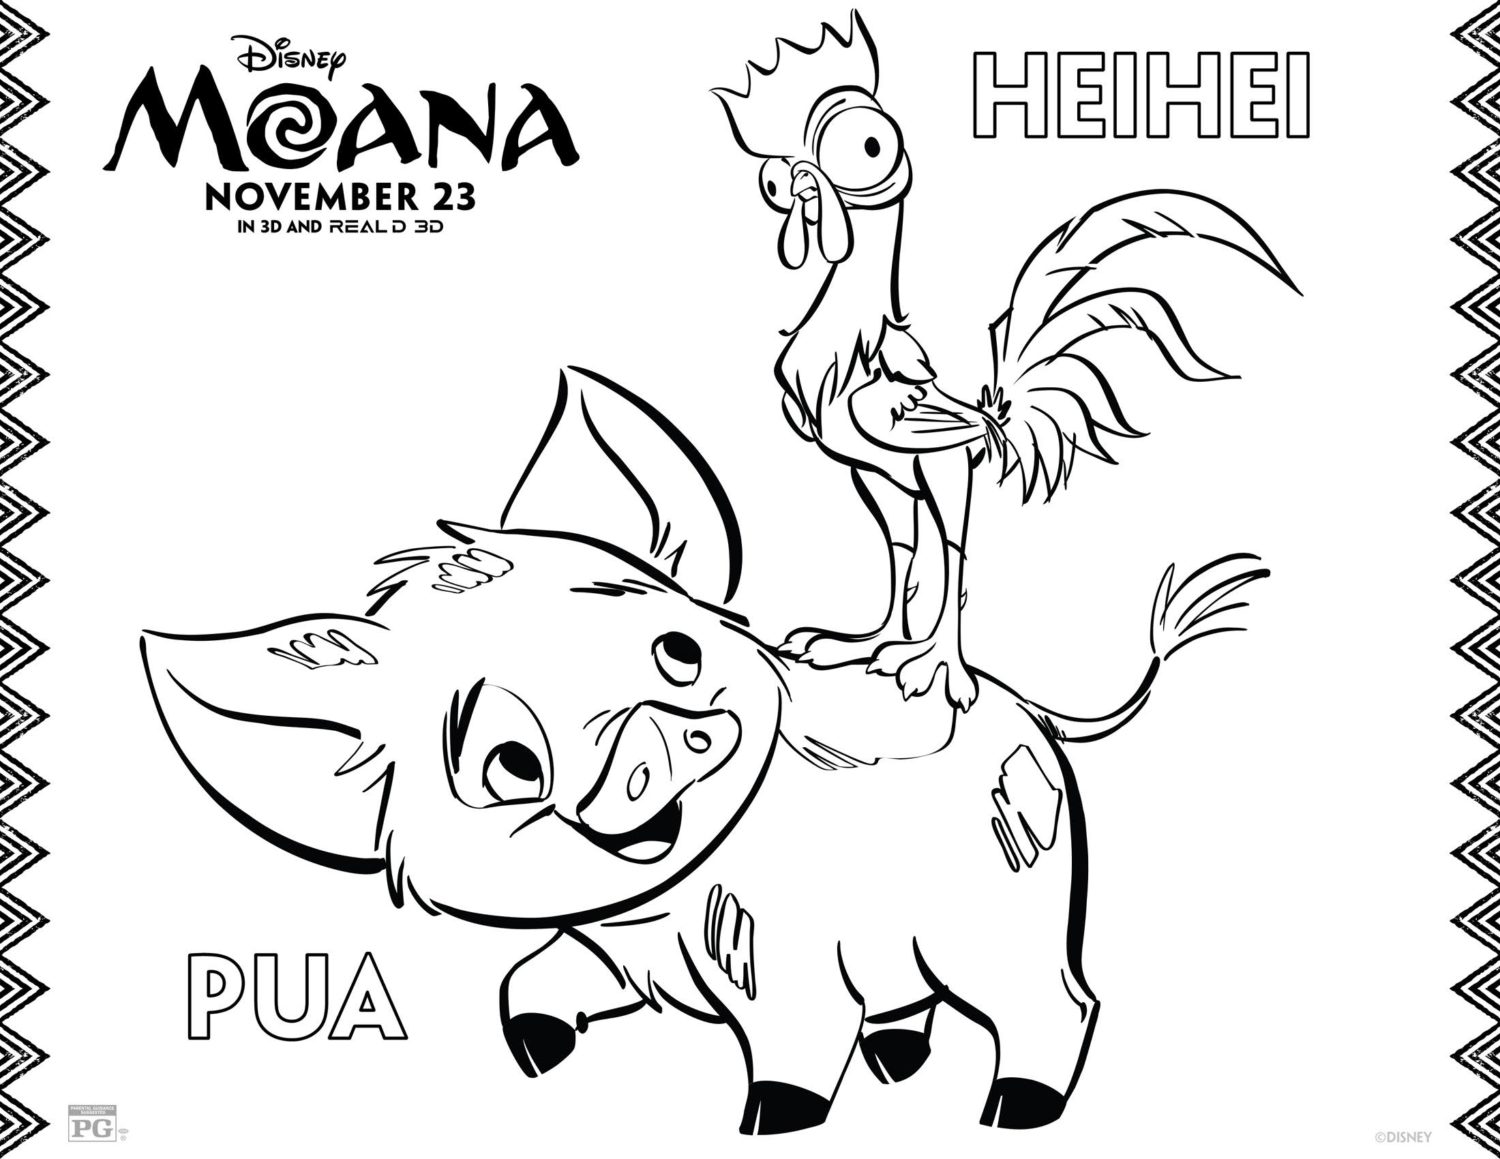 Moana Pua and Heihei Coloring Pages and Activity Sheets